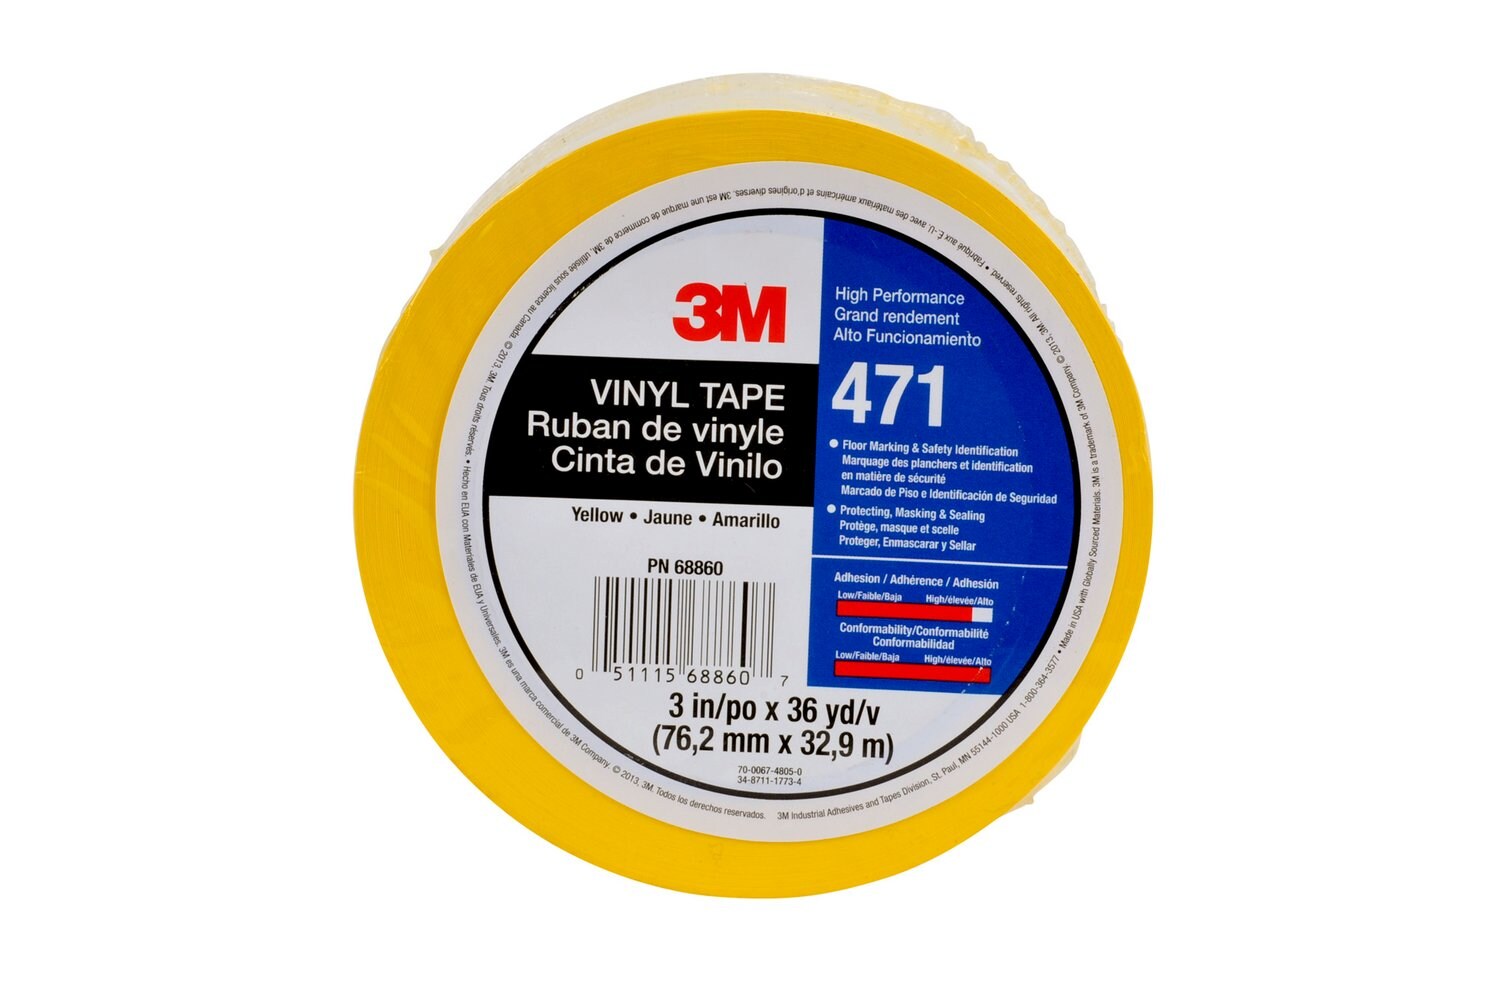 7010389792 - 3M Vinyl Tape 471, Yellow, 1/2 in x 36 yd, 5.2 mil, 72 rolls per case,
Heat Treated, Individually Wrapped Conveniently Packaged